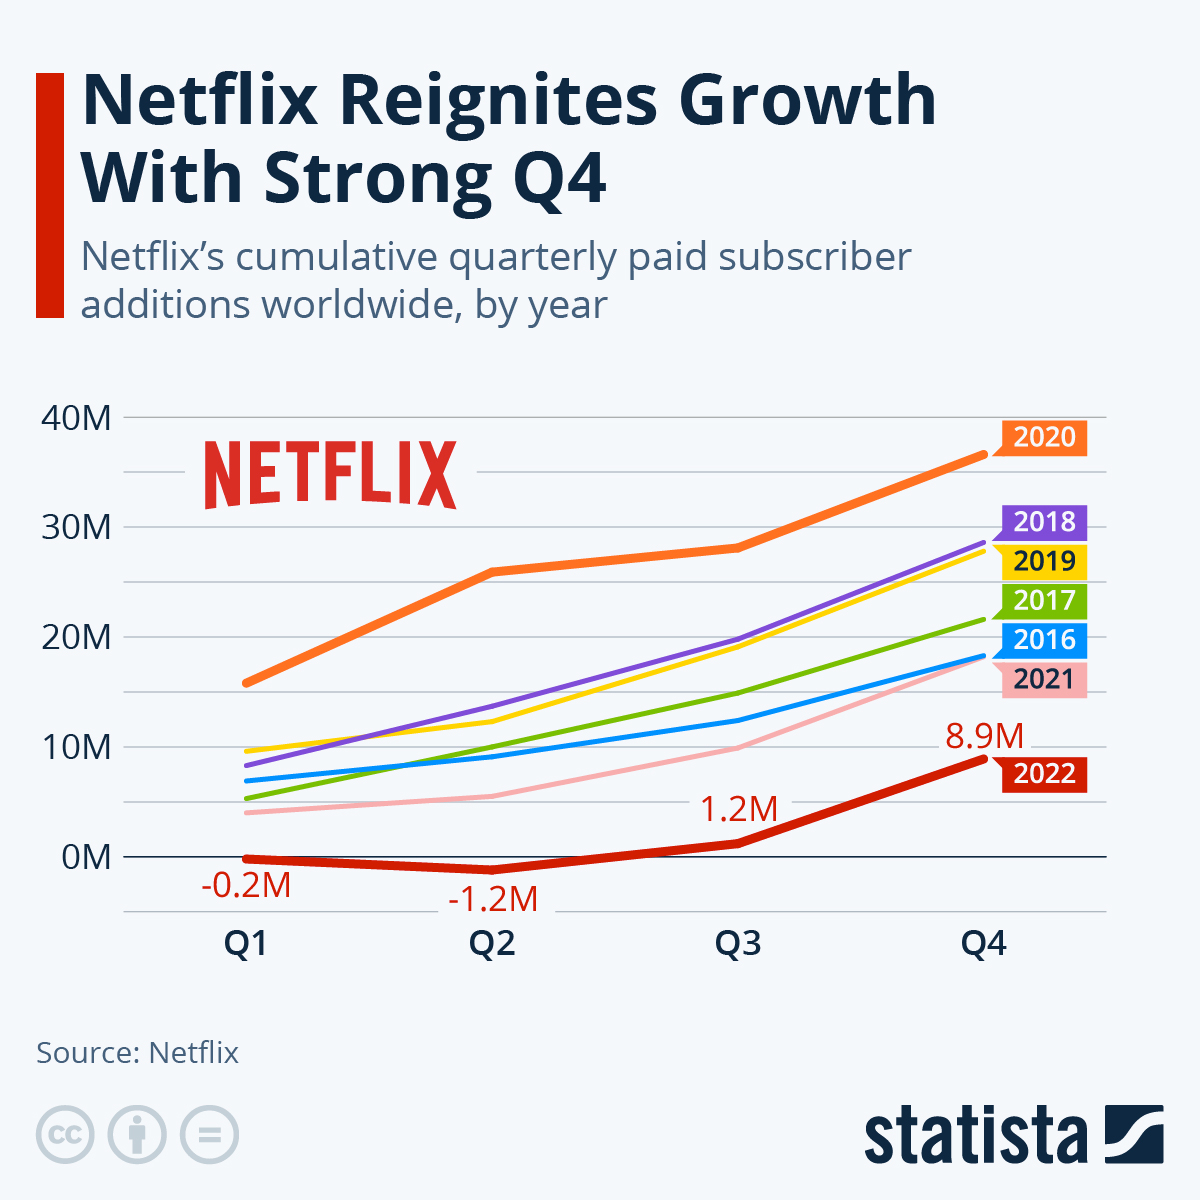 Netflix's subscribers reached 231 million as of 2022